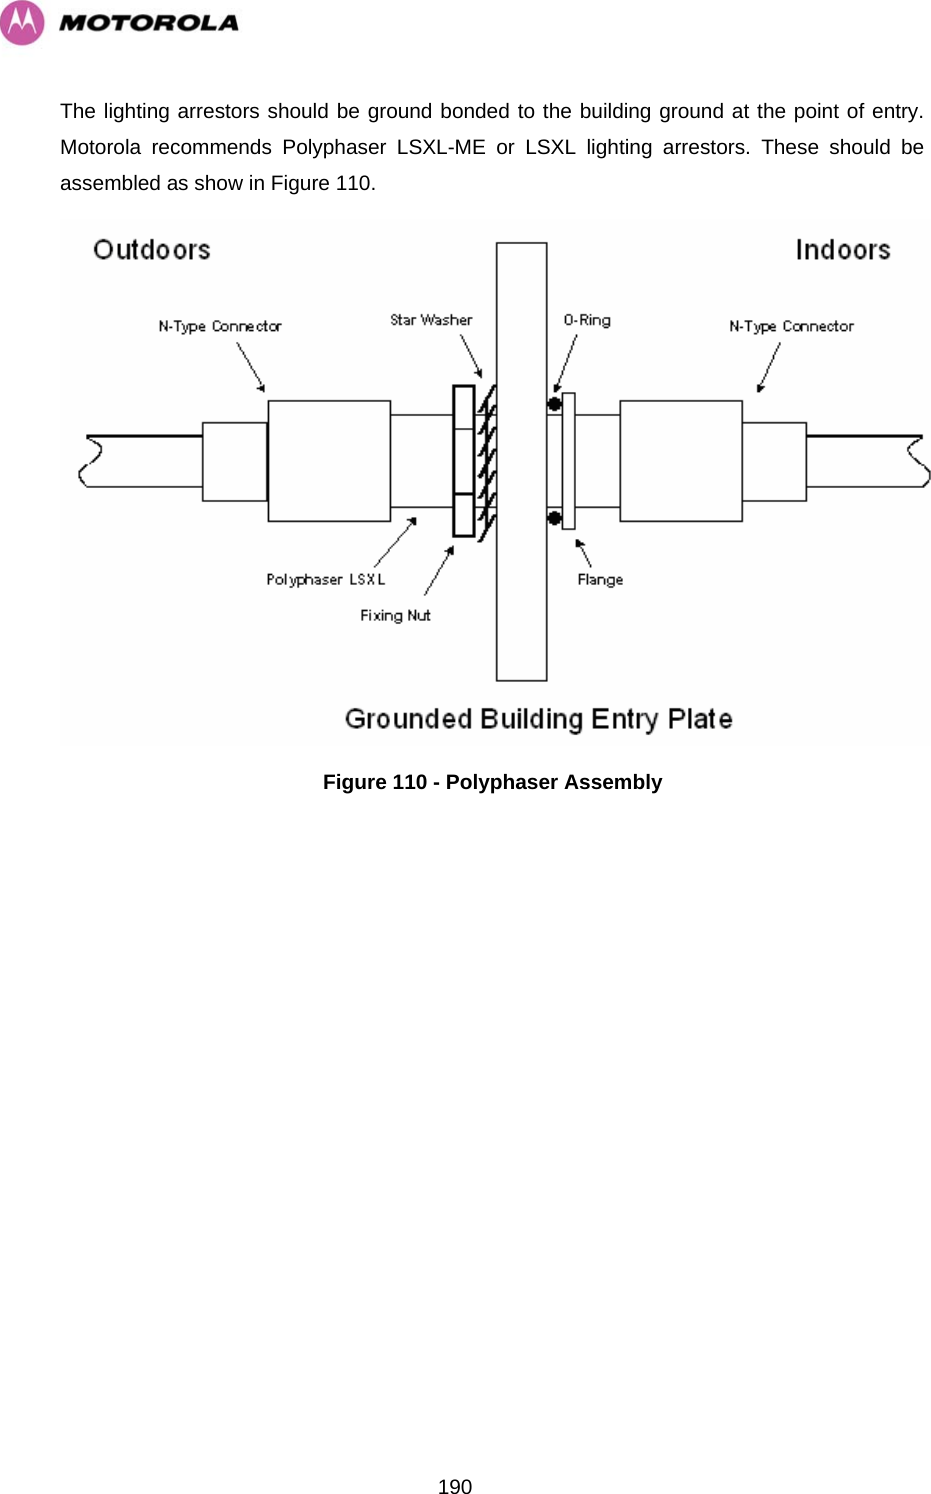   190The lighting arrestors should be ground bonded to the building ground at the point of entry. Motorola recommends Polyphaser LSXL-ME or LSXL lighting arrestors. These should be assembled as show in Figure 110.  Figure 110 - Polyphaser Assembly    